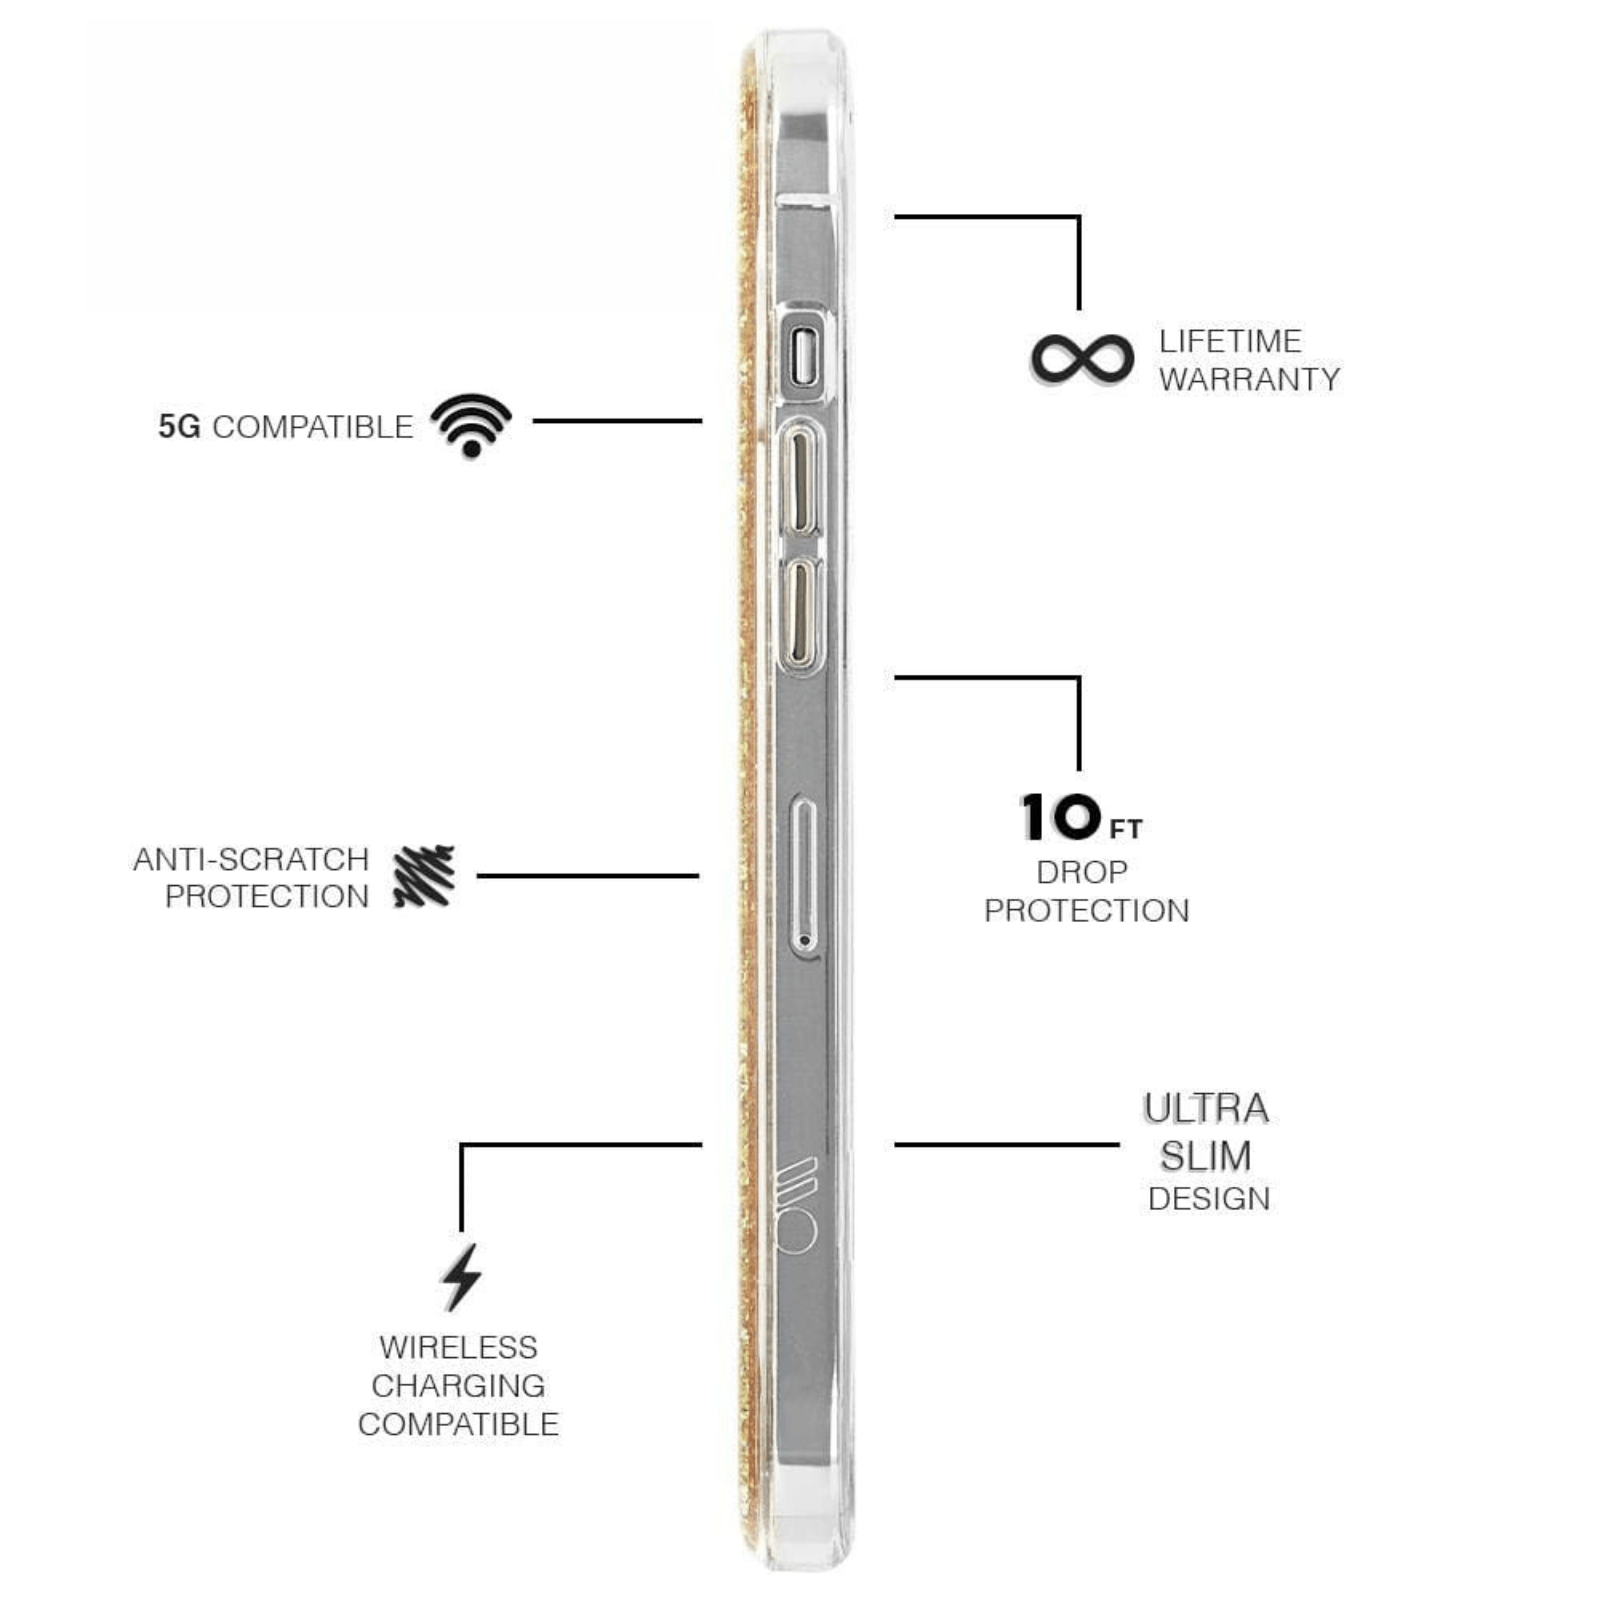 5G Compatible, Anti- Scratch Protection, Wireless Charging Compatible, Lifetime Warranty, 10 ft Drop Protection, Ultra Slim design. color::Gold